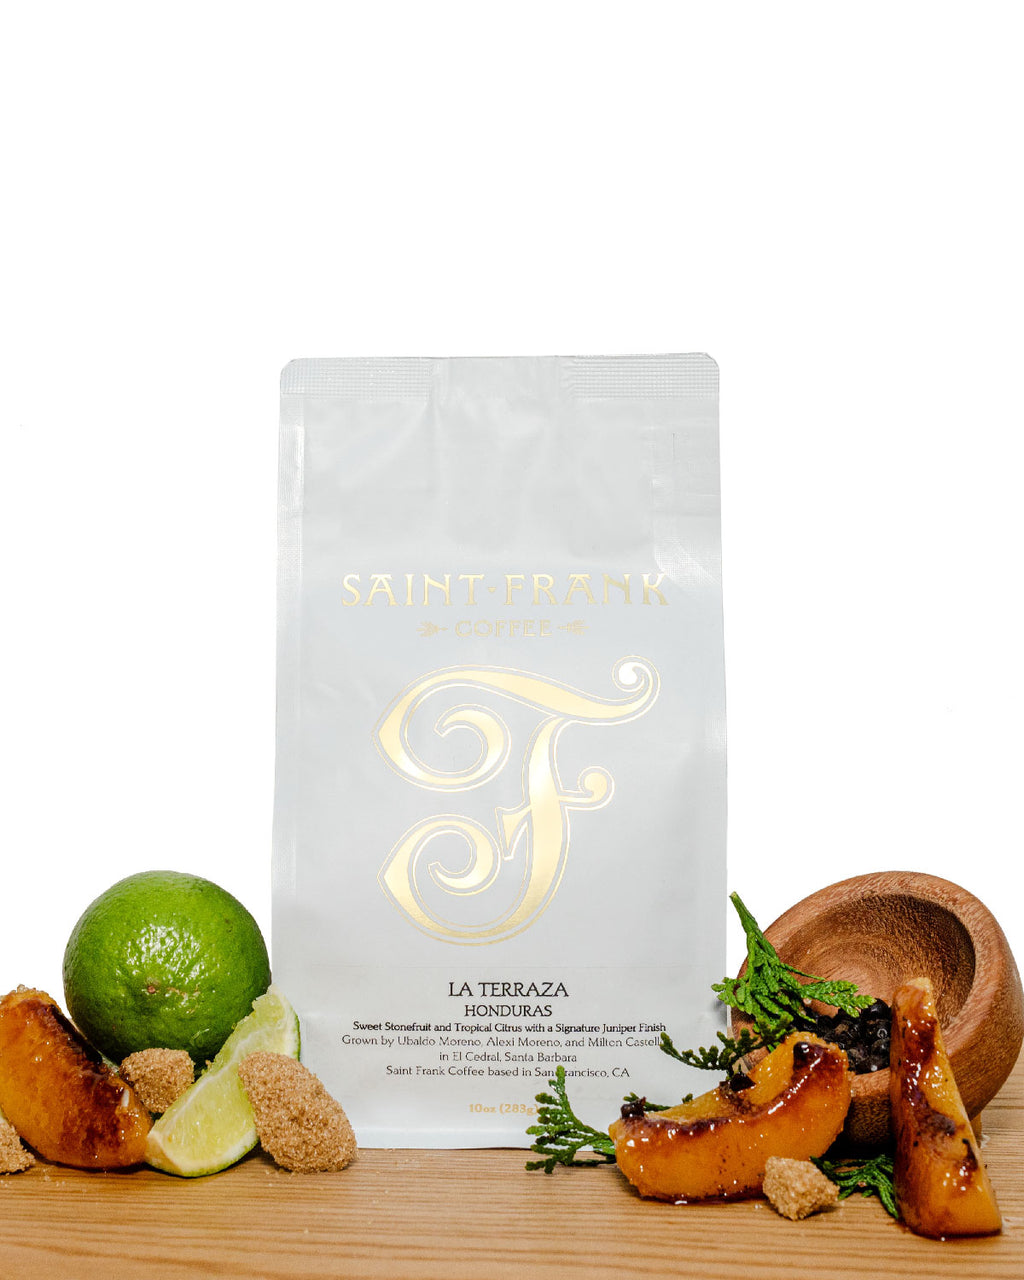 La Terraza coffee bag surrounded by Apricots, Lime, and Juniper